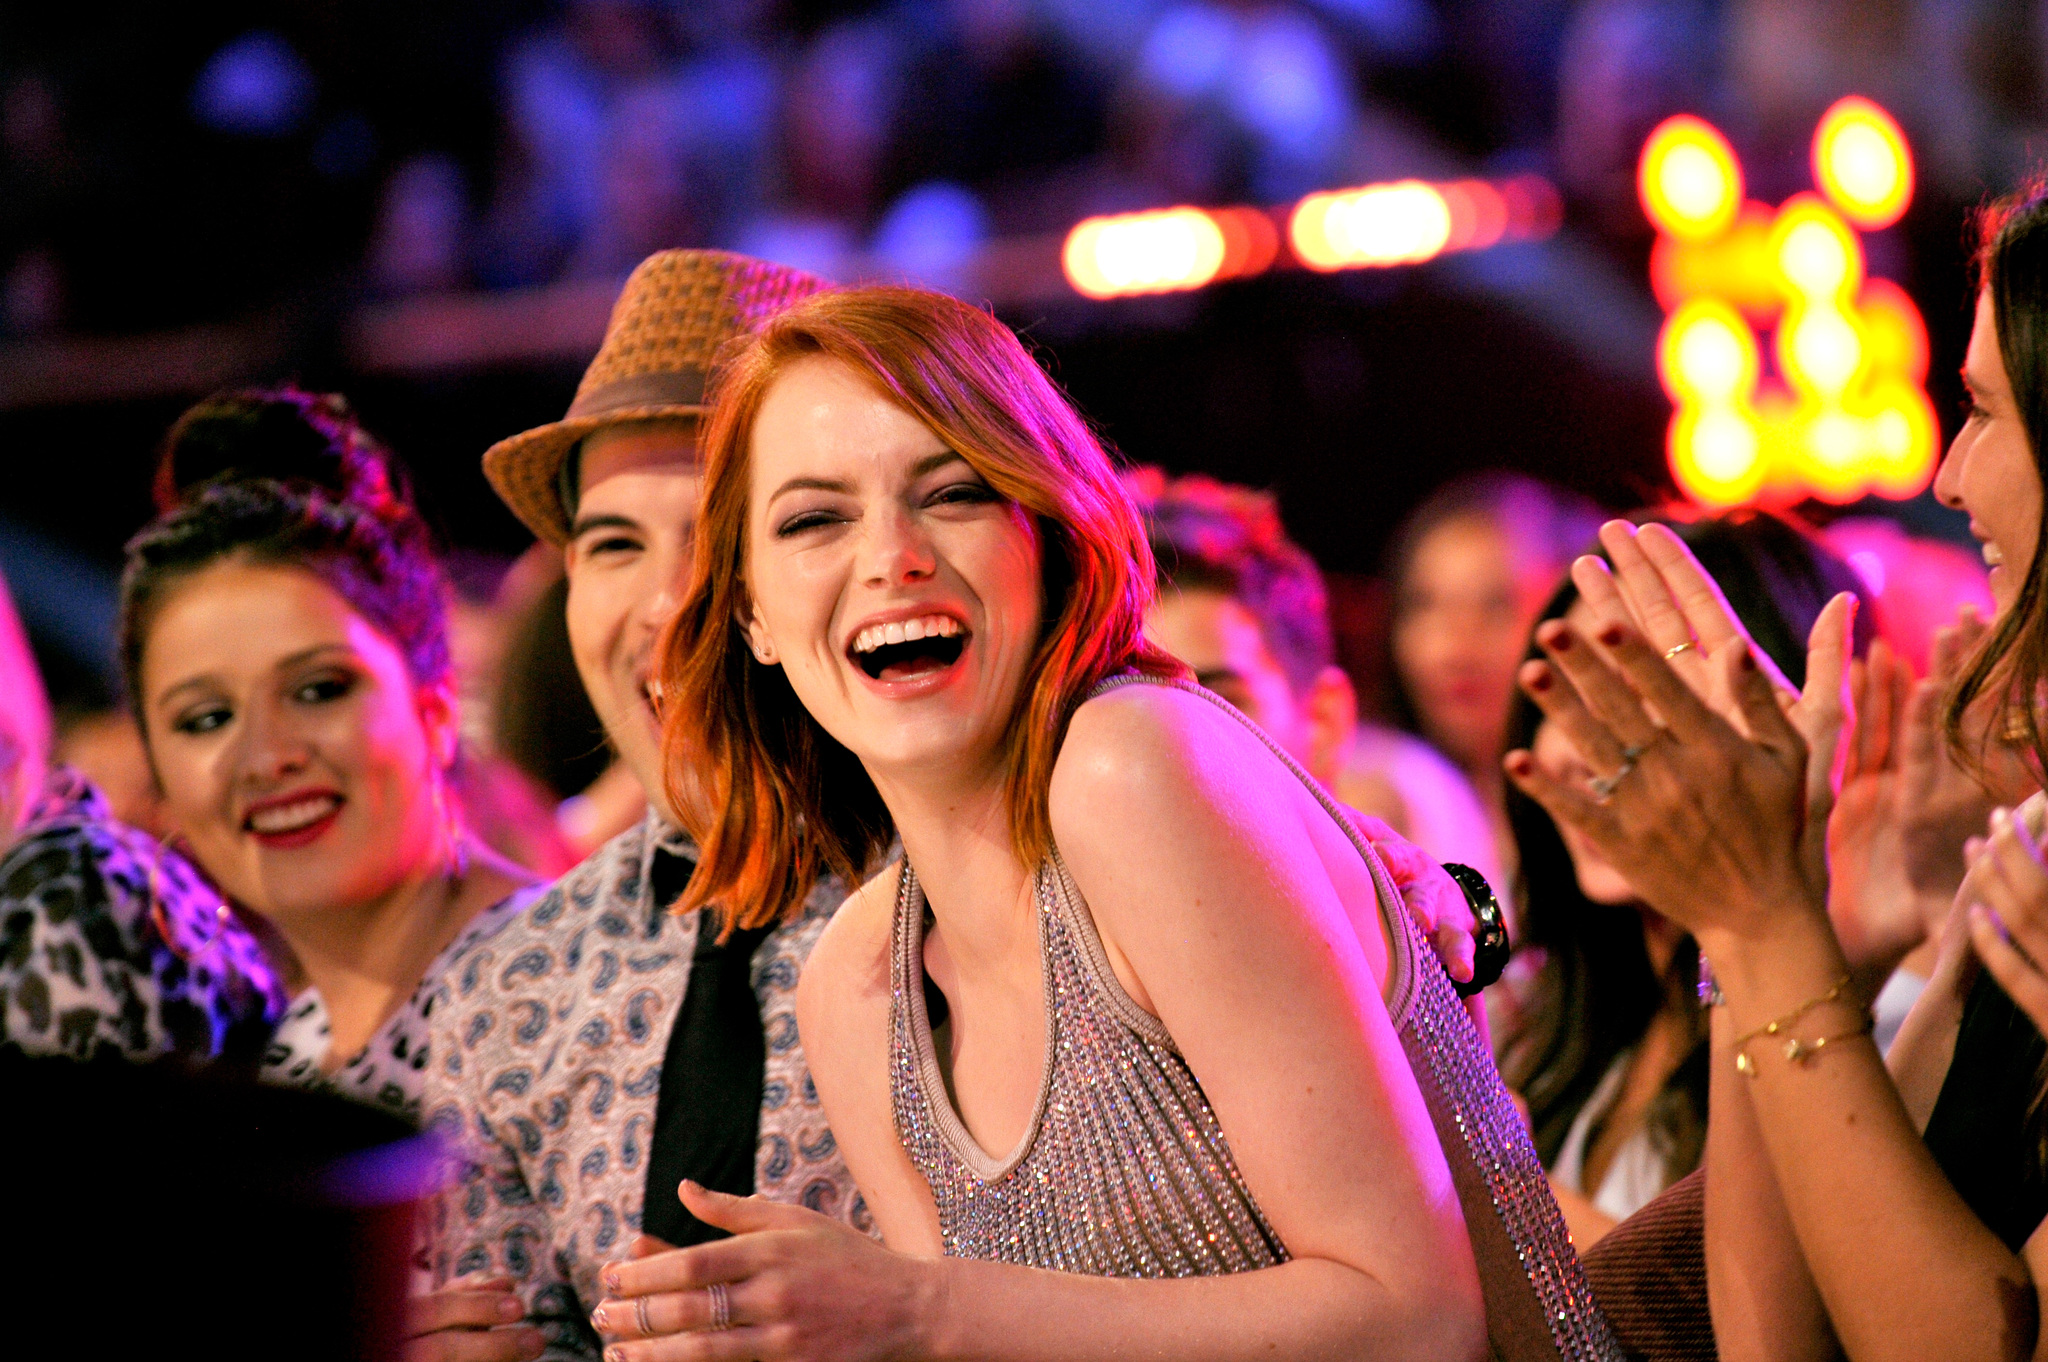 Emma Stone at event of Nickelodeon Kids' Choice Awards 2015 (2015)